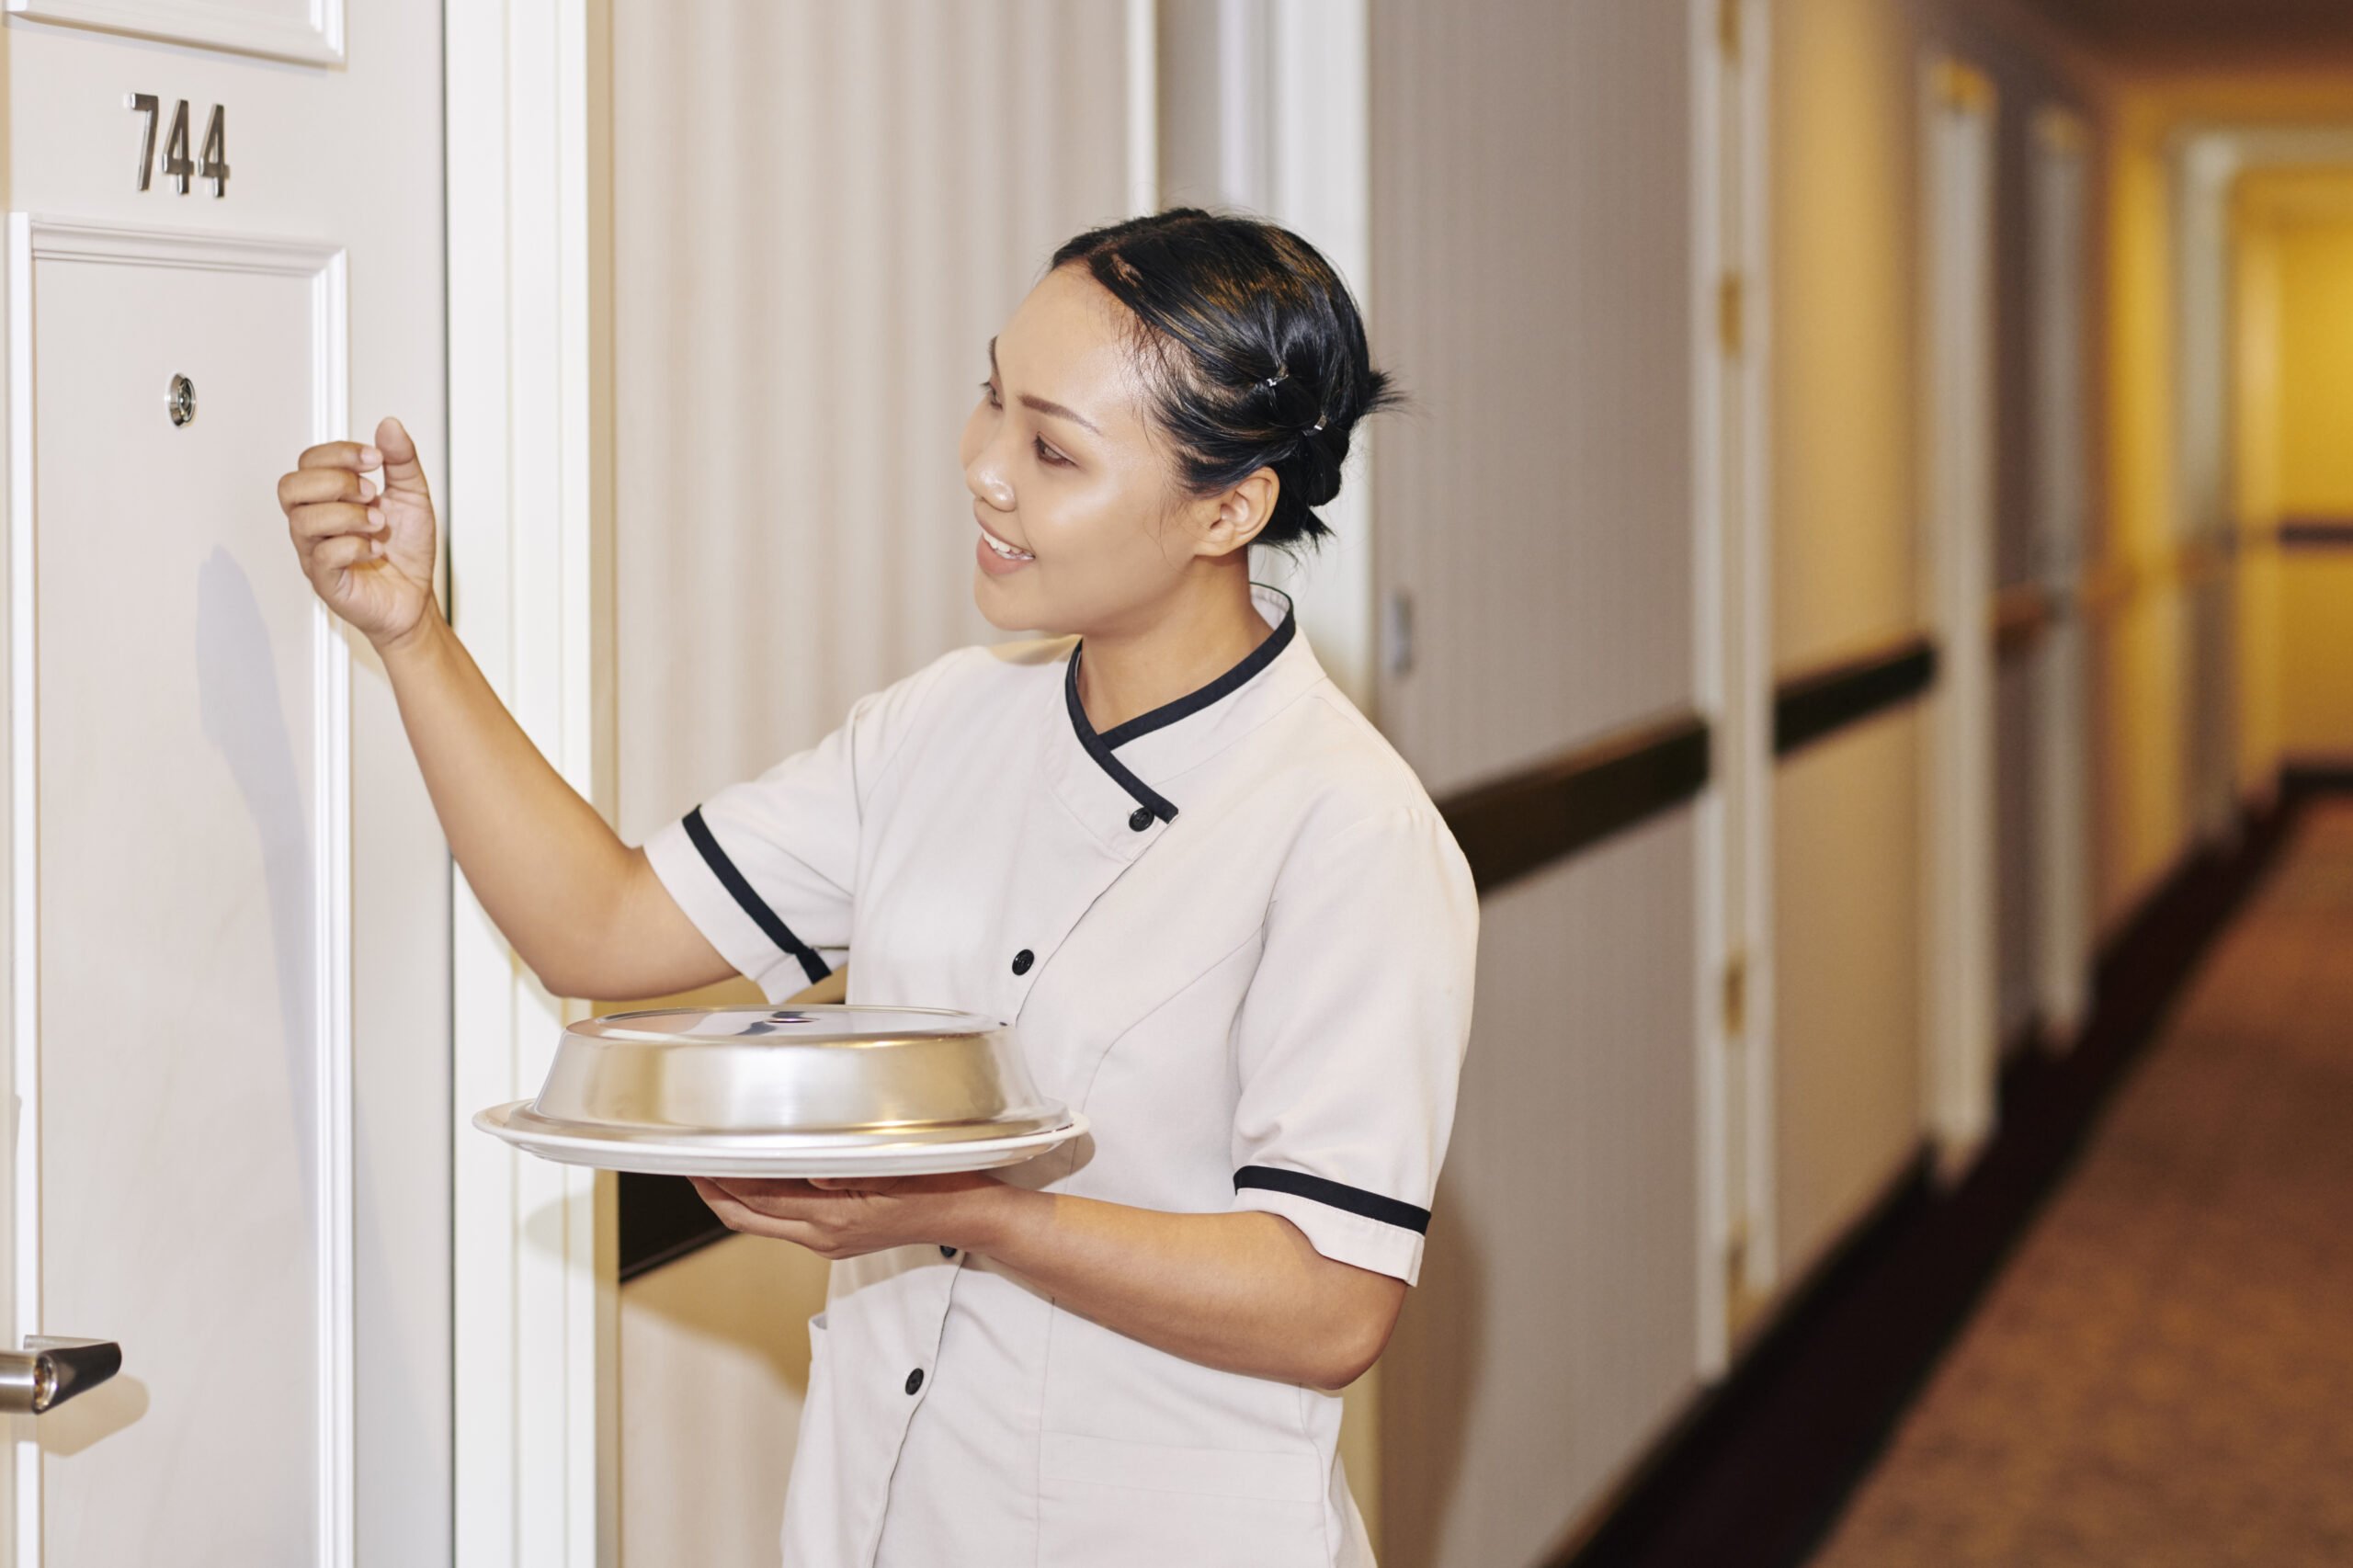 Room Service With a Smartphone